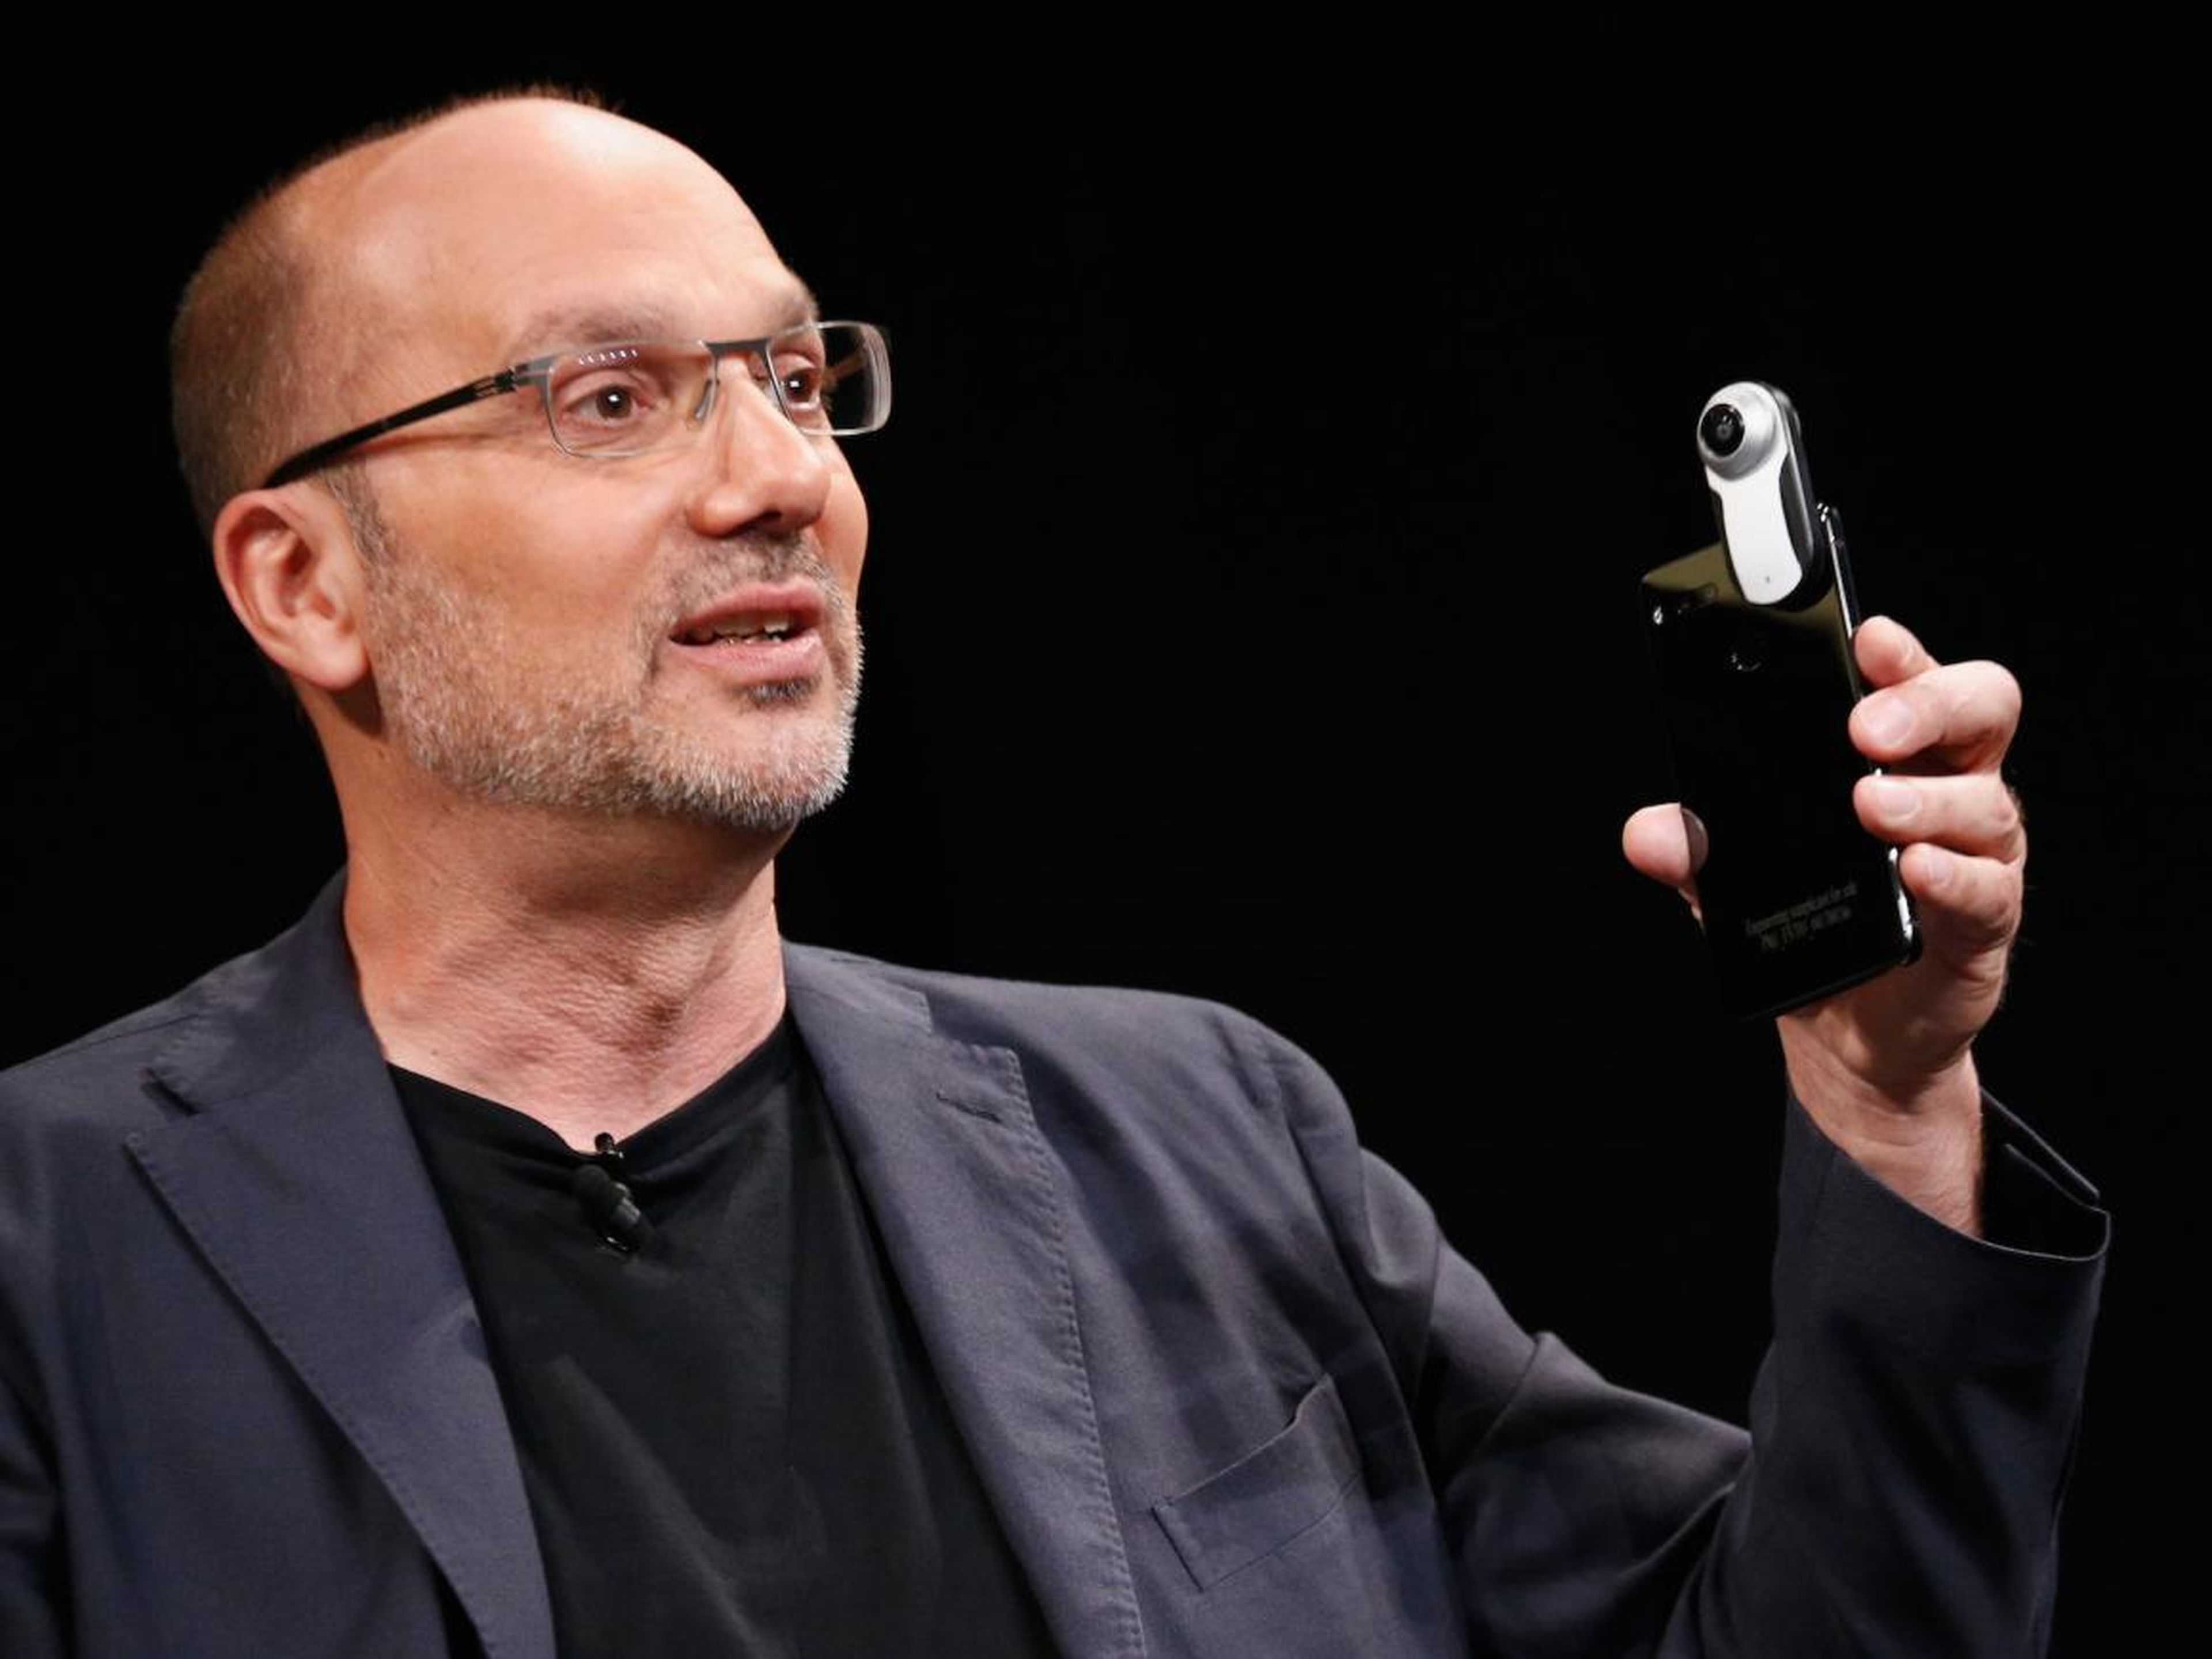 Essential's Andy Rubin, who also co-founded the Android operating system, announcing the Essential Phone with a 360-degree camera attachment.